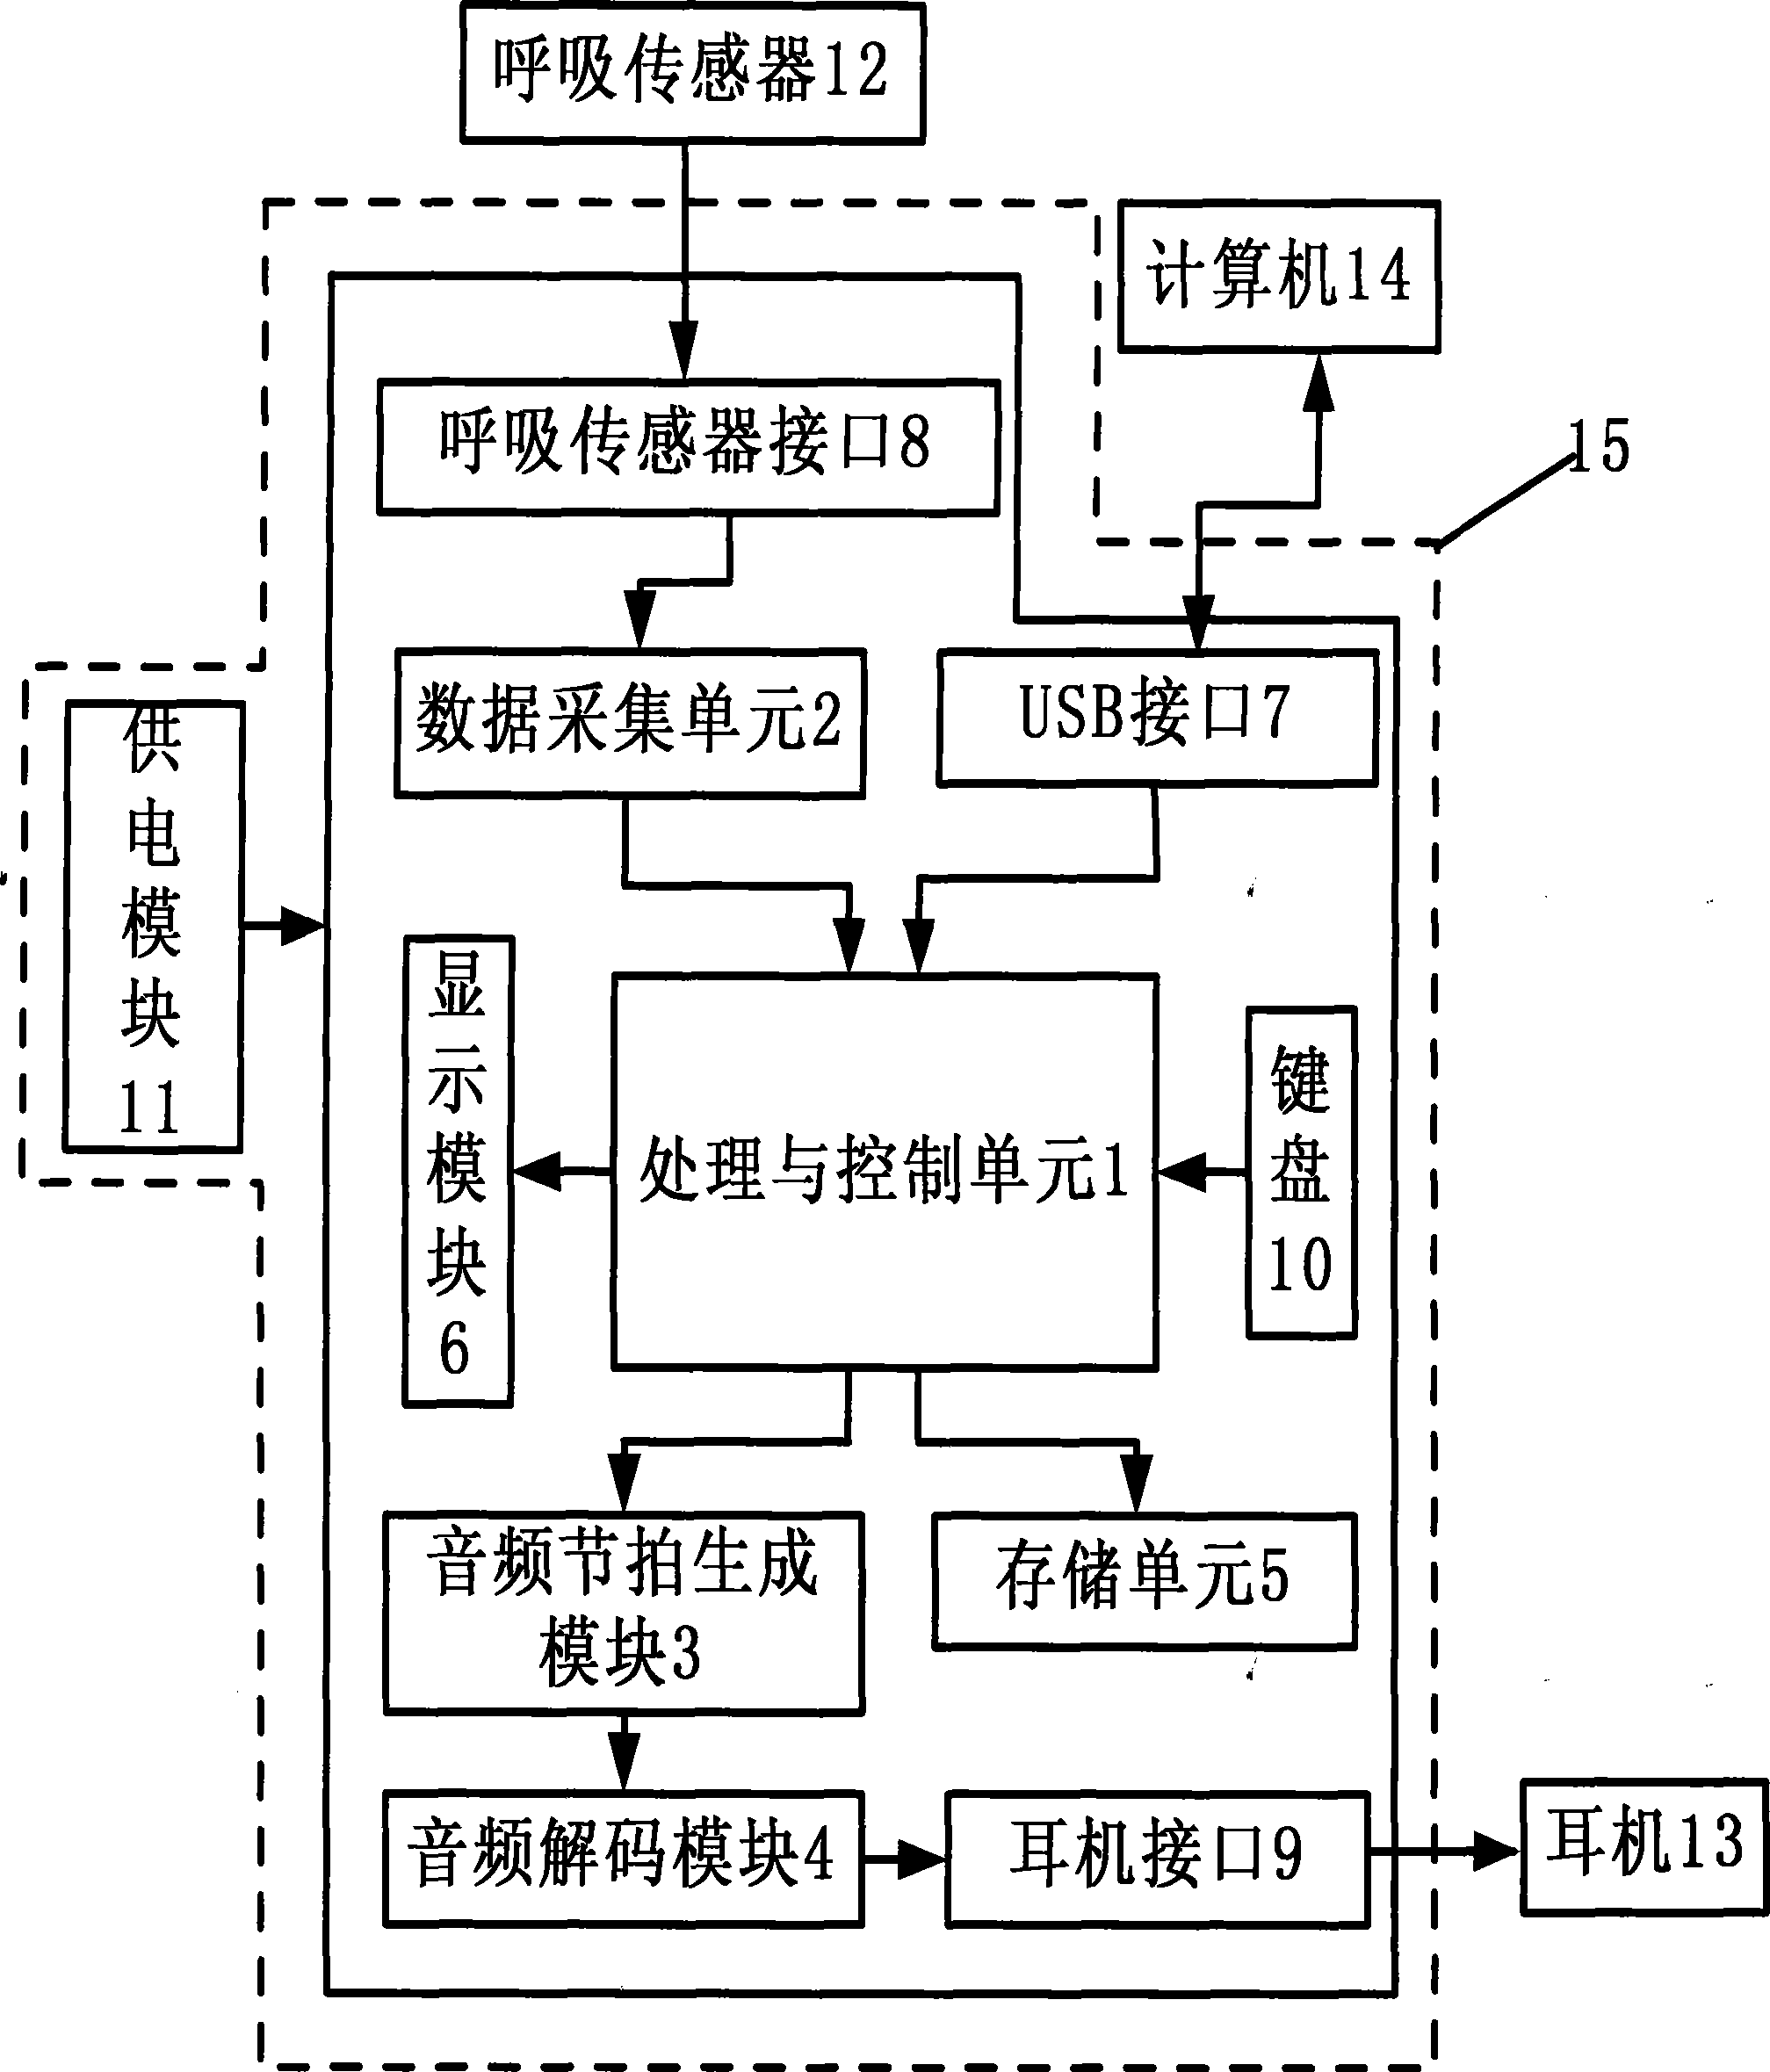 High blood pressure therapeutic equipment and control method thereof